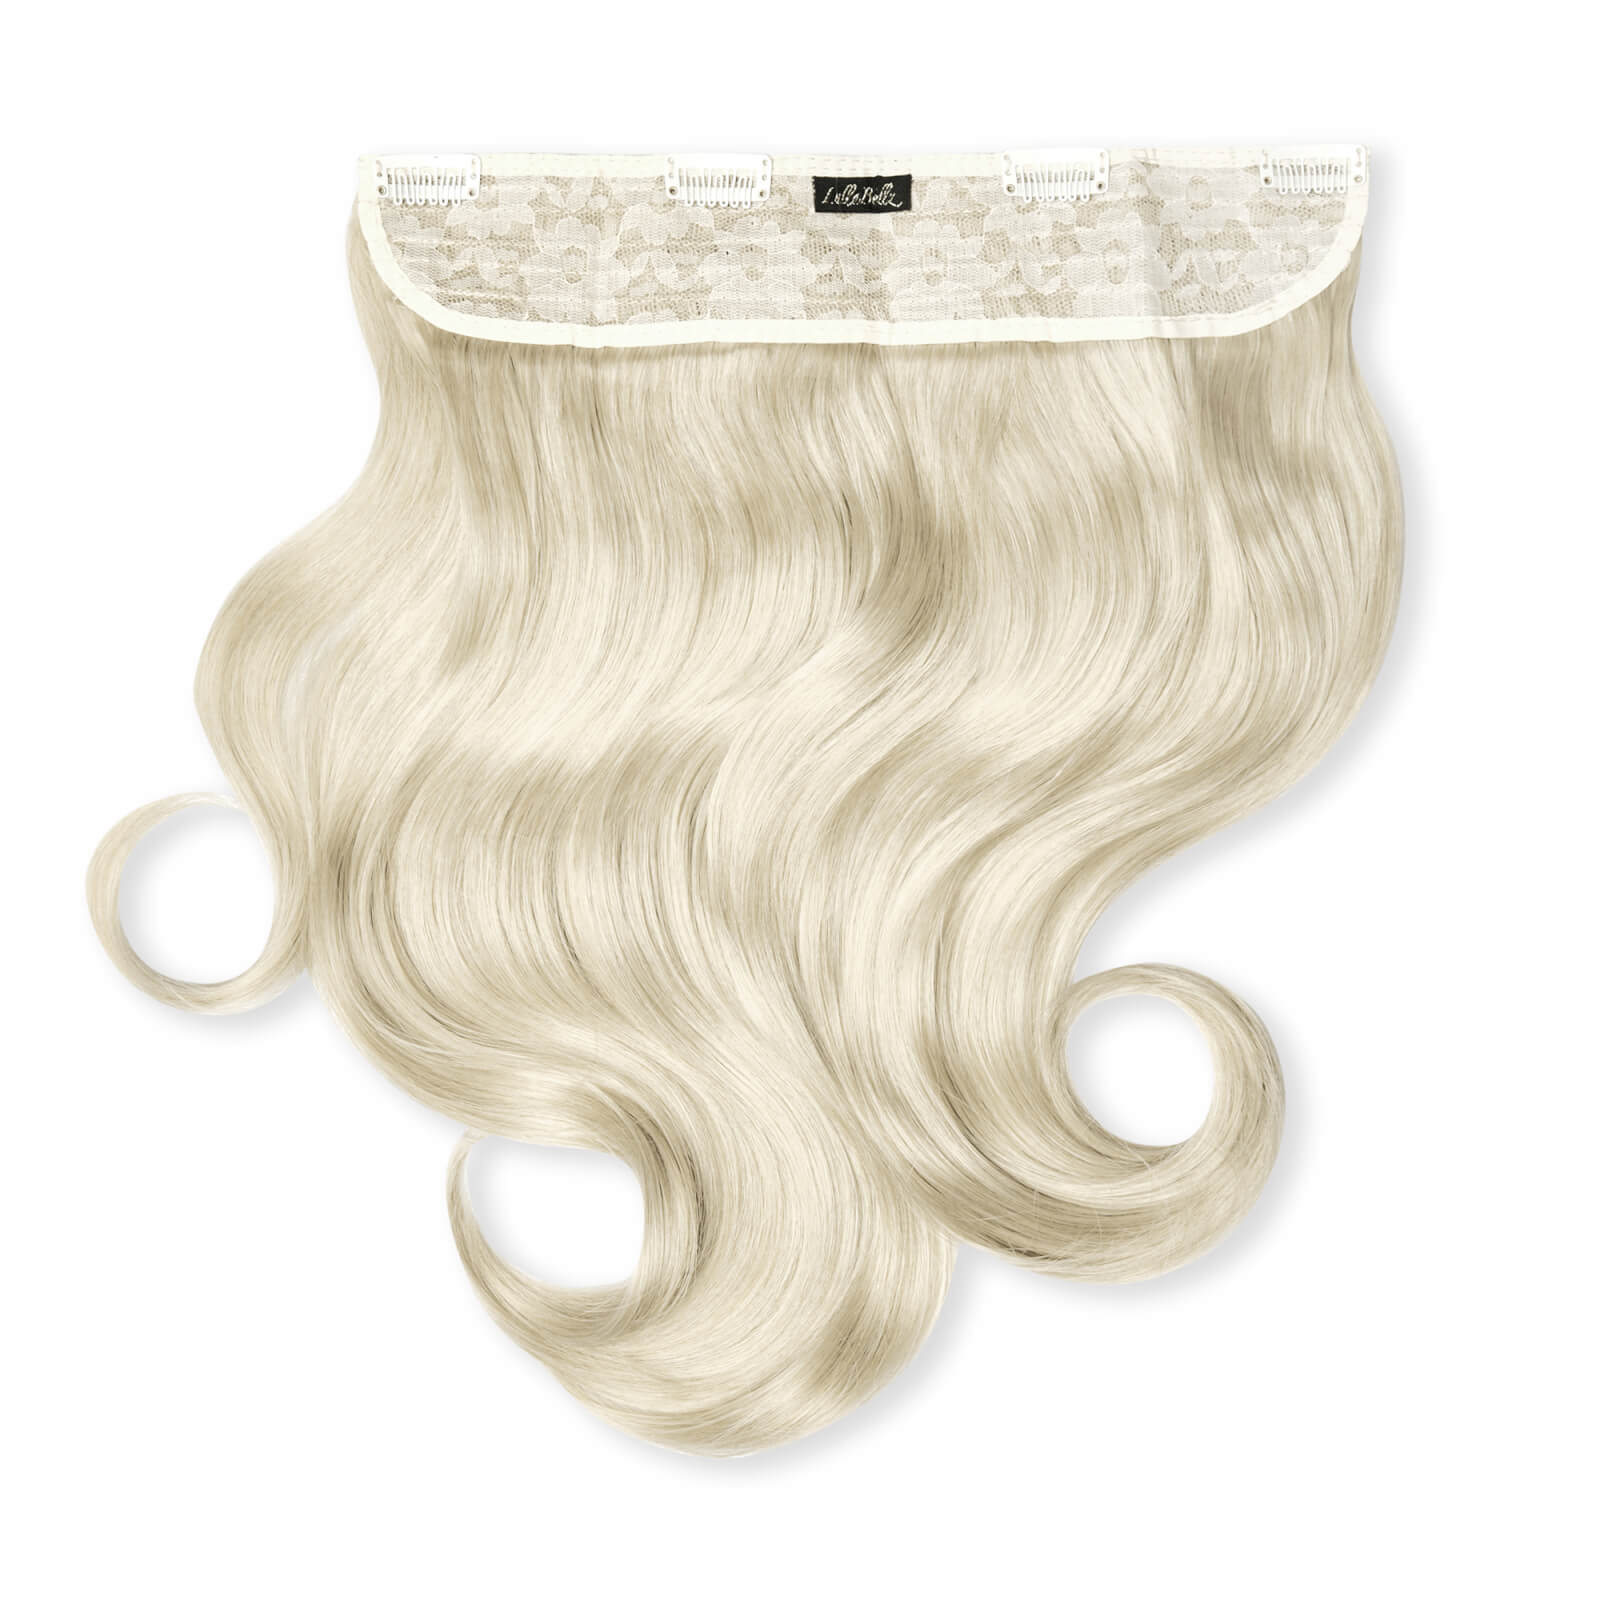 Image of LullaBellz Thick 16 1-Piece Curly Clip in Hair Extensions (Various Colours) - Bleach Blonde